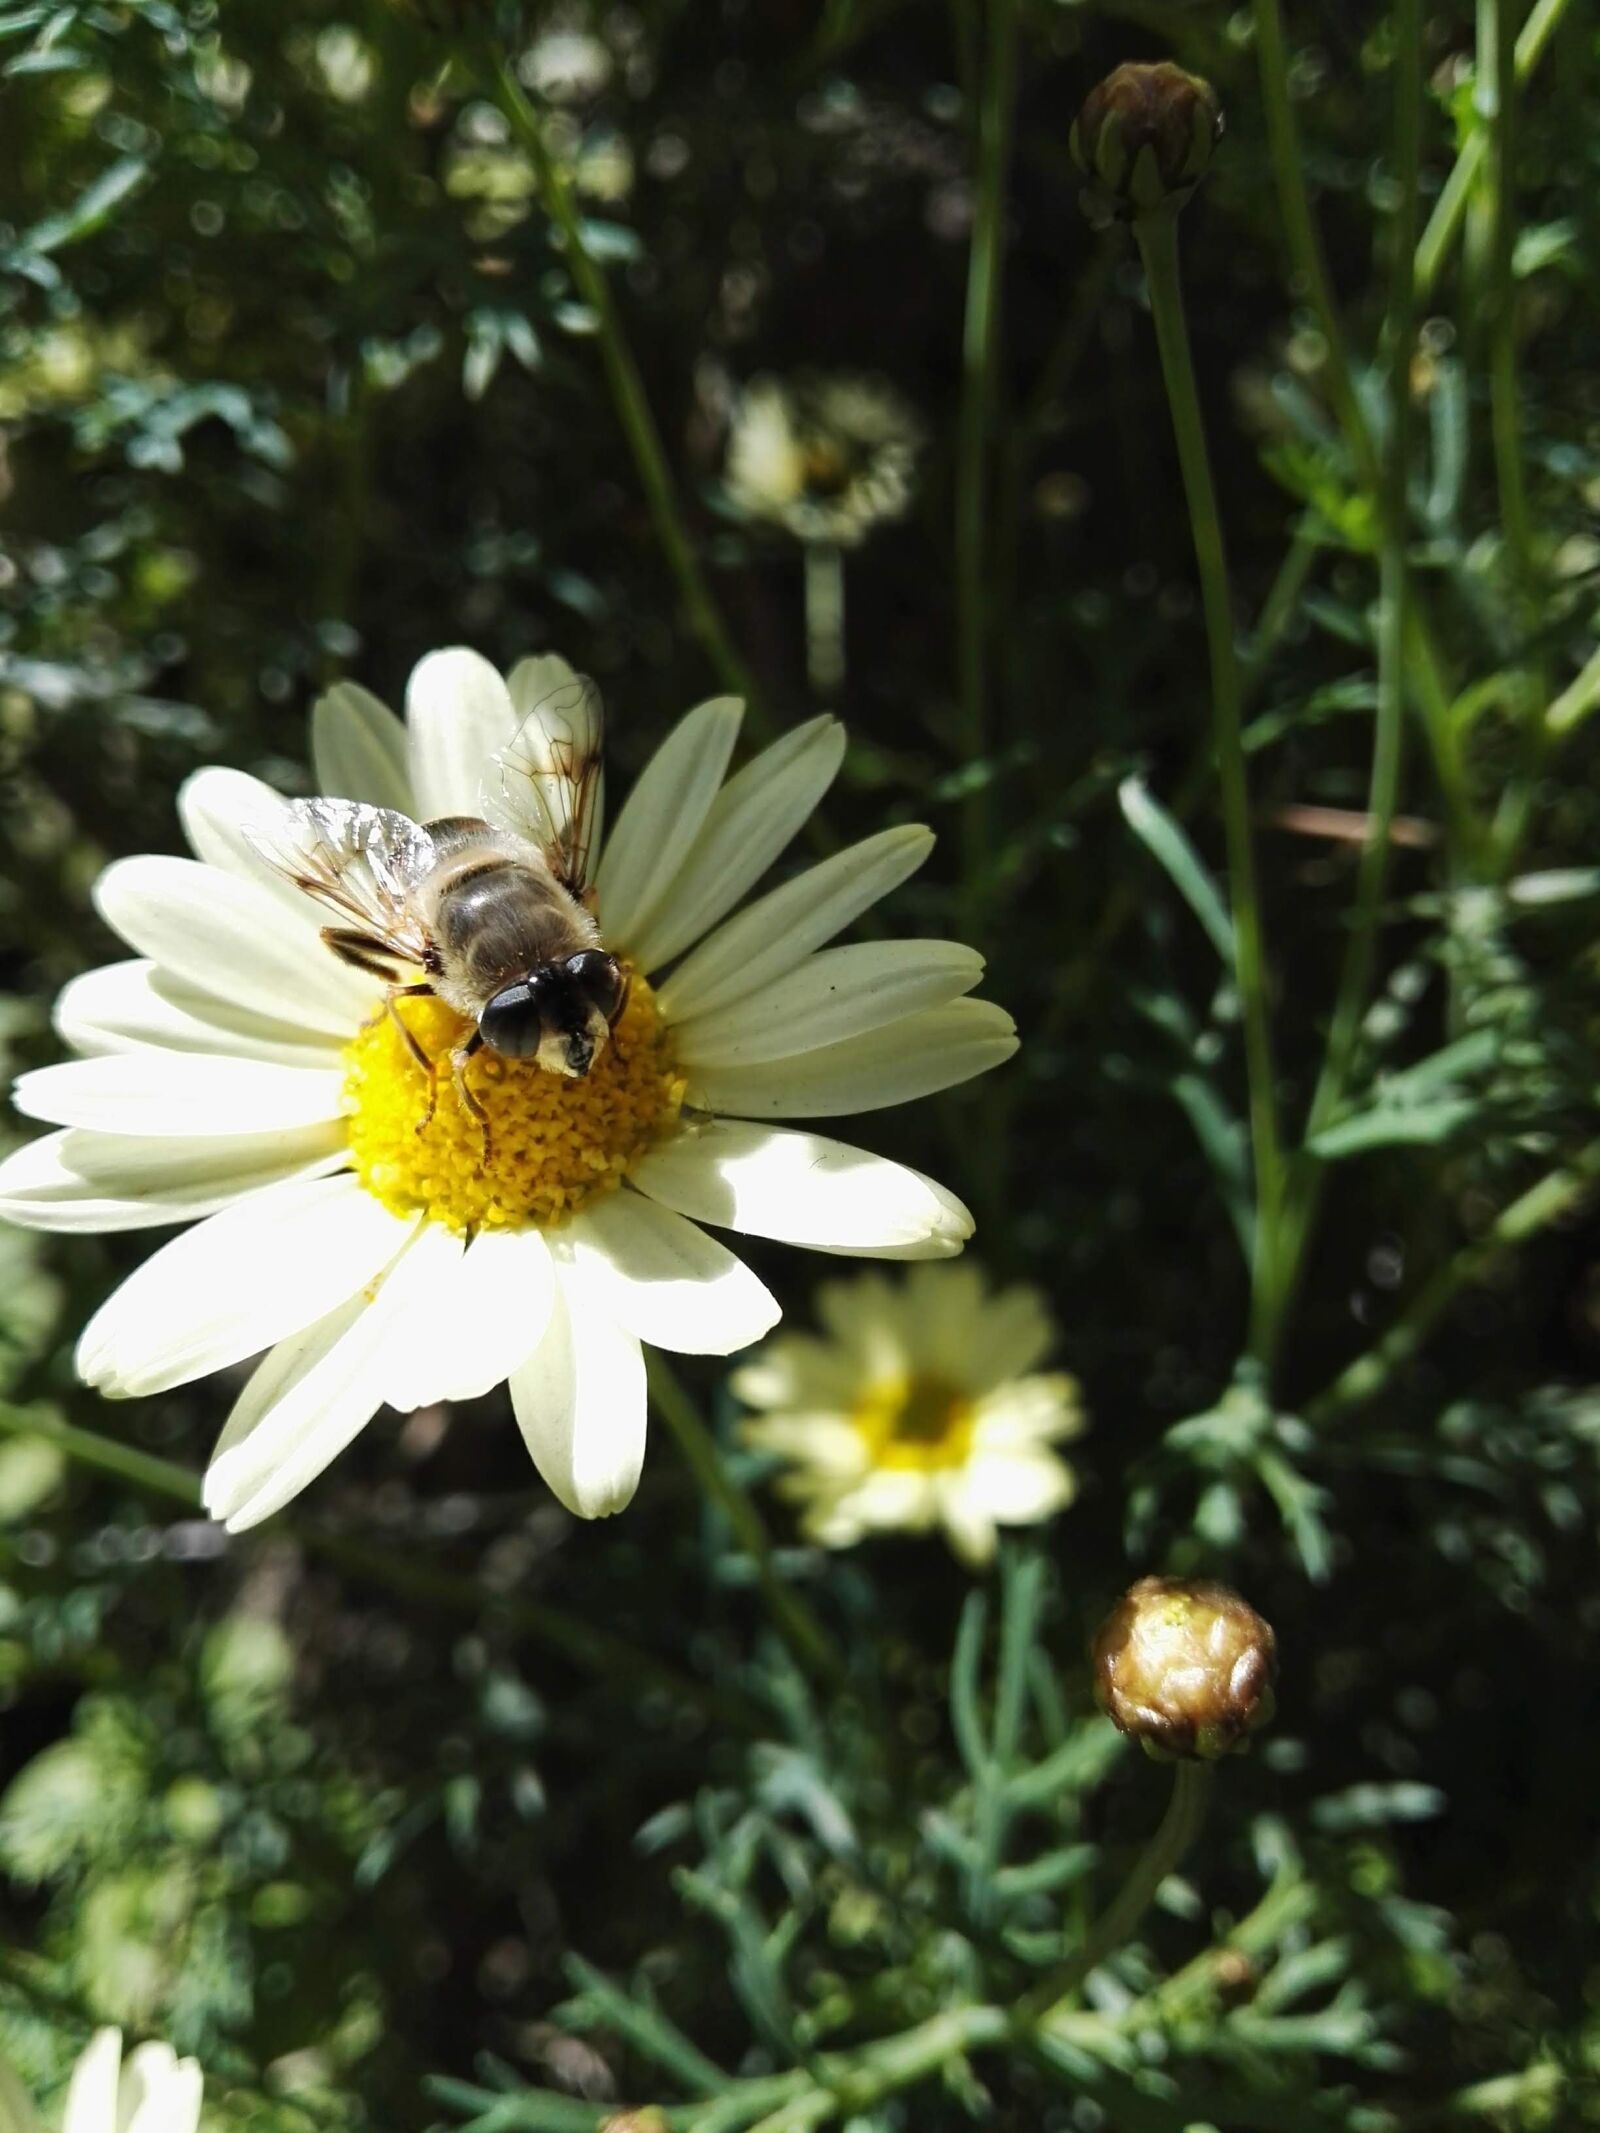 HUAWEI P8 sample photo. Bee, flower, insects photography